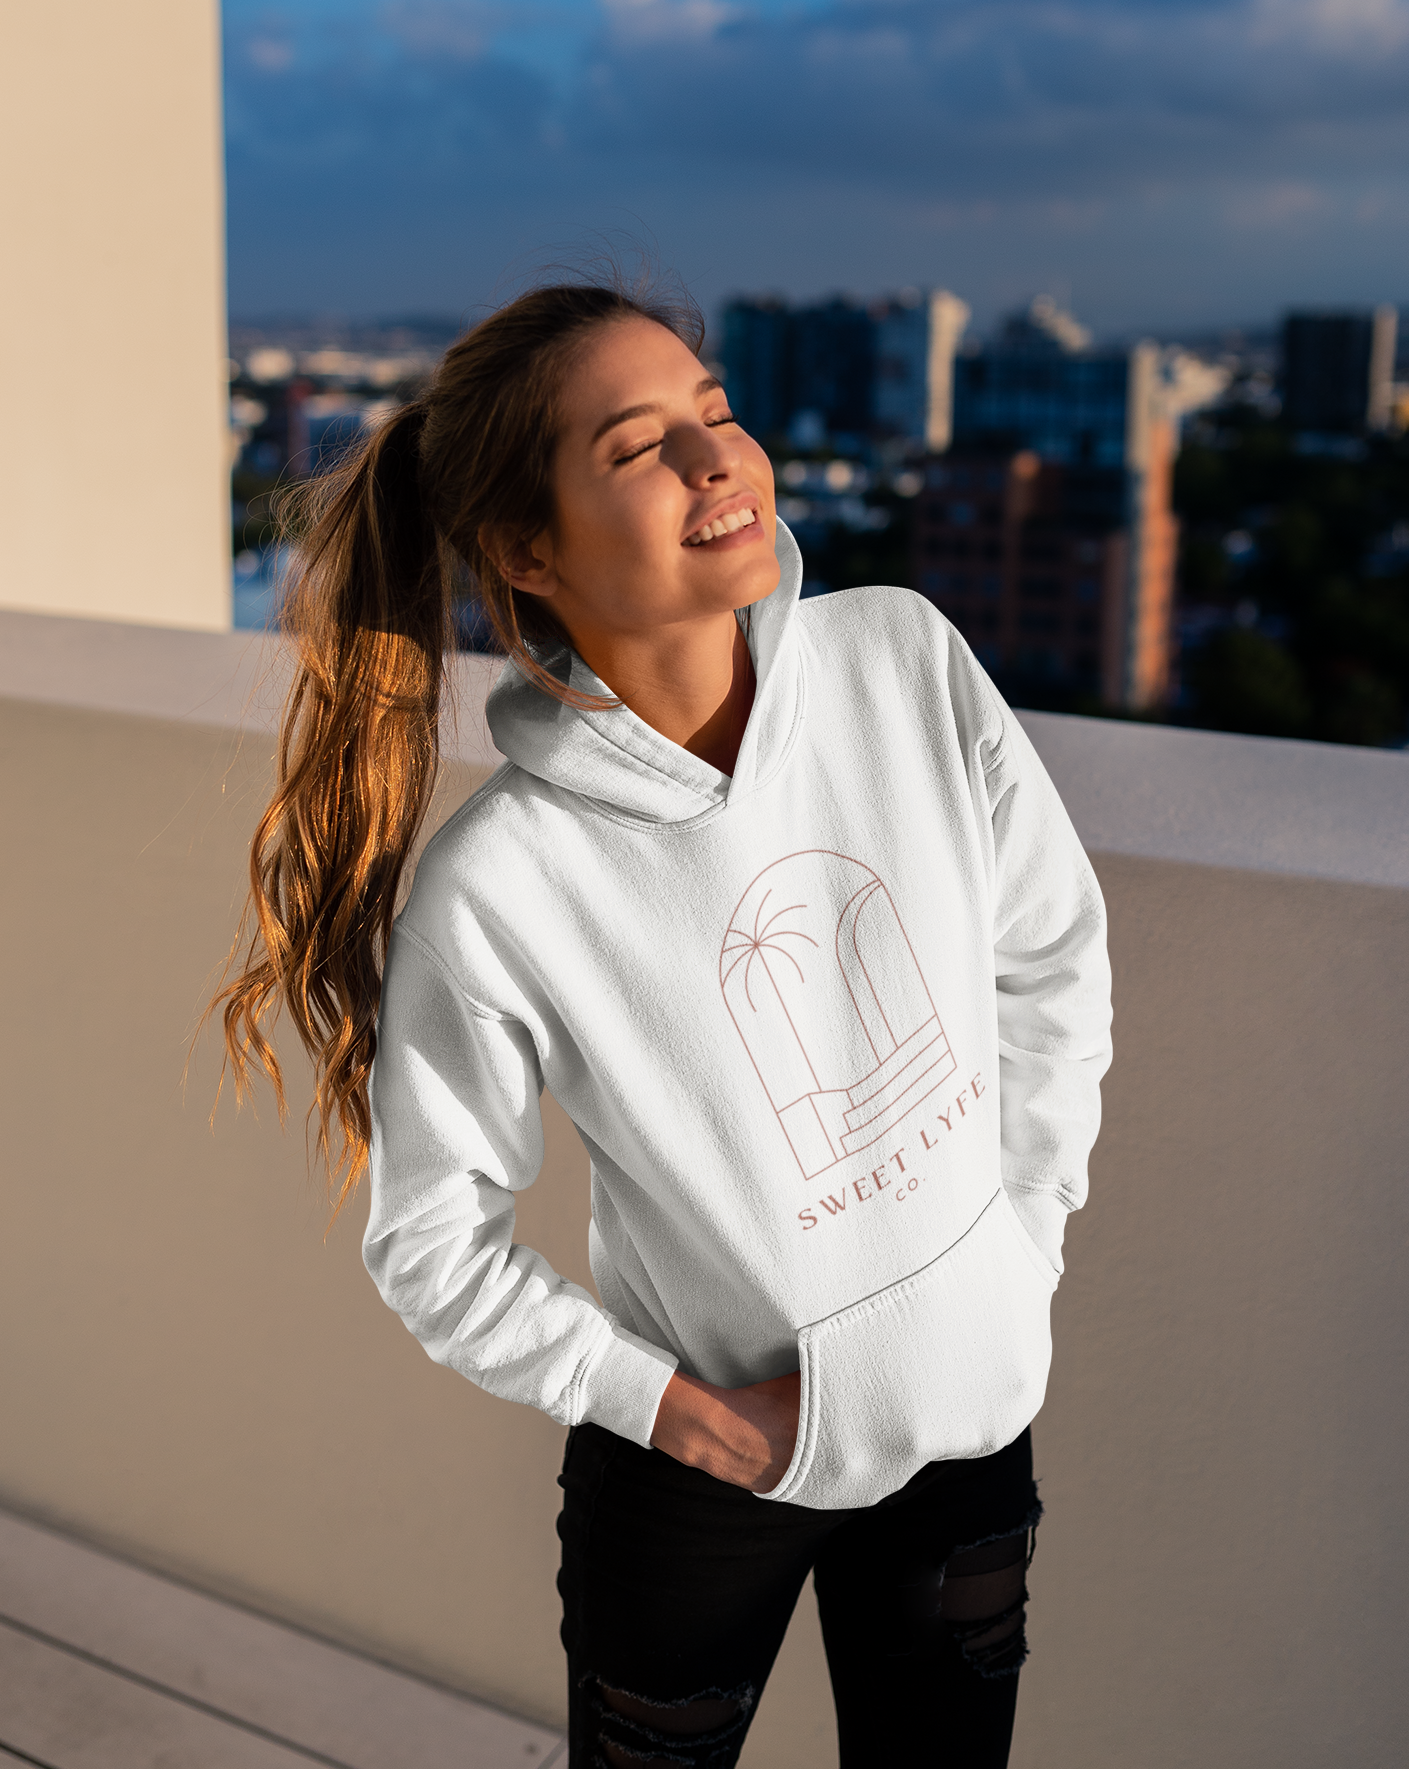 Wishing you were on a beach somewhere? Us too! This tropical hoodie has a minimalist design that inspires all things beachy.  Made with a breathable cotton, you can rock this sweatshirt in comfort and style.